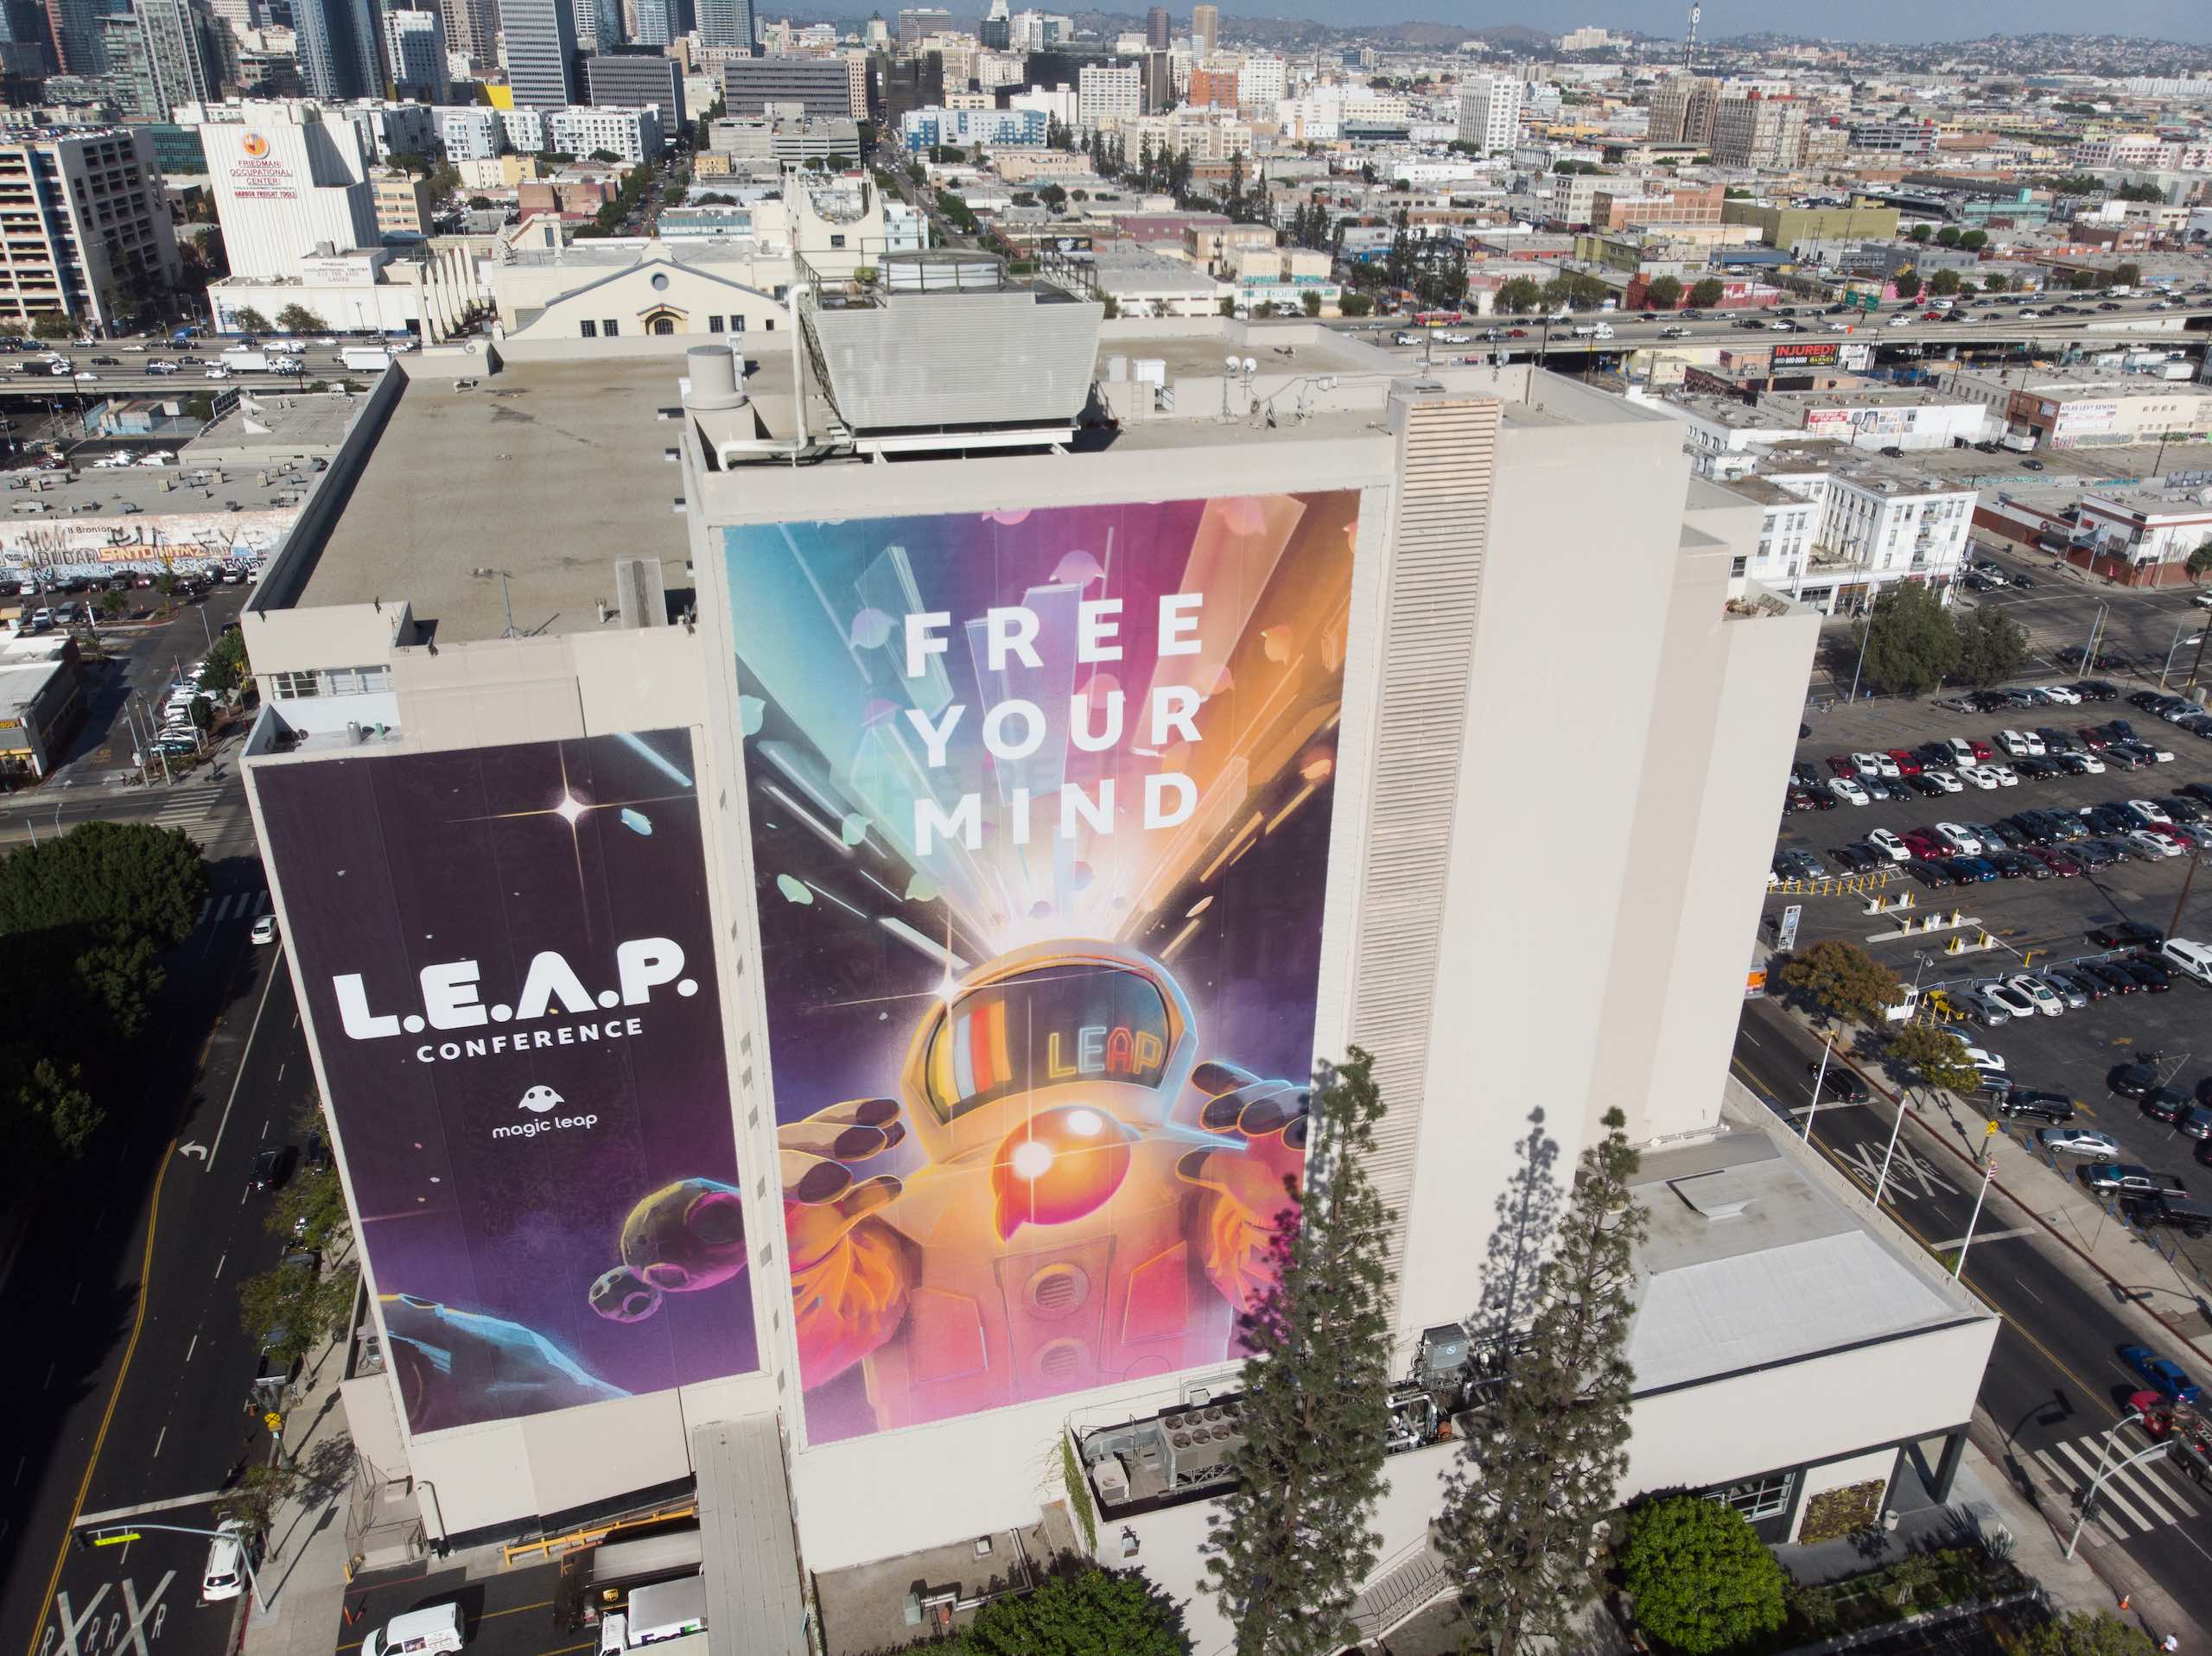 DUPLICATE LEAP Conference Magic Leap and Free Your Mind banners on display on side of a building in city